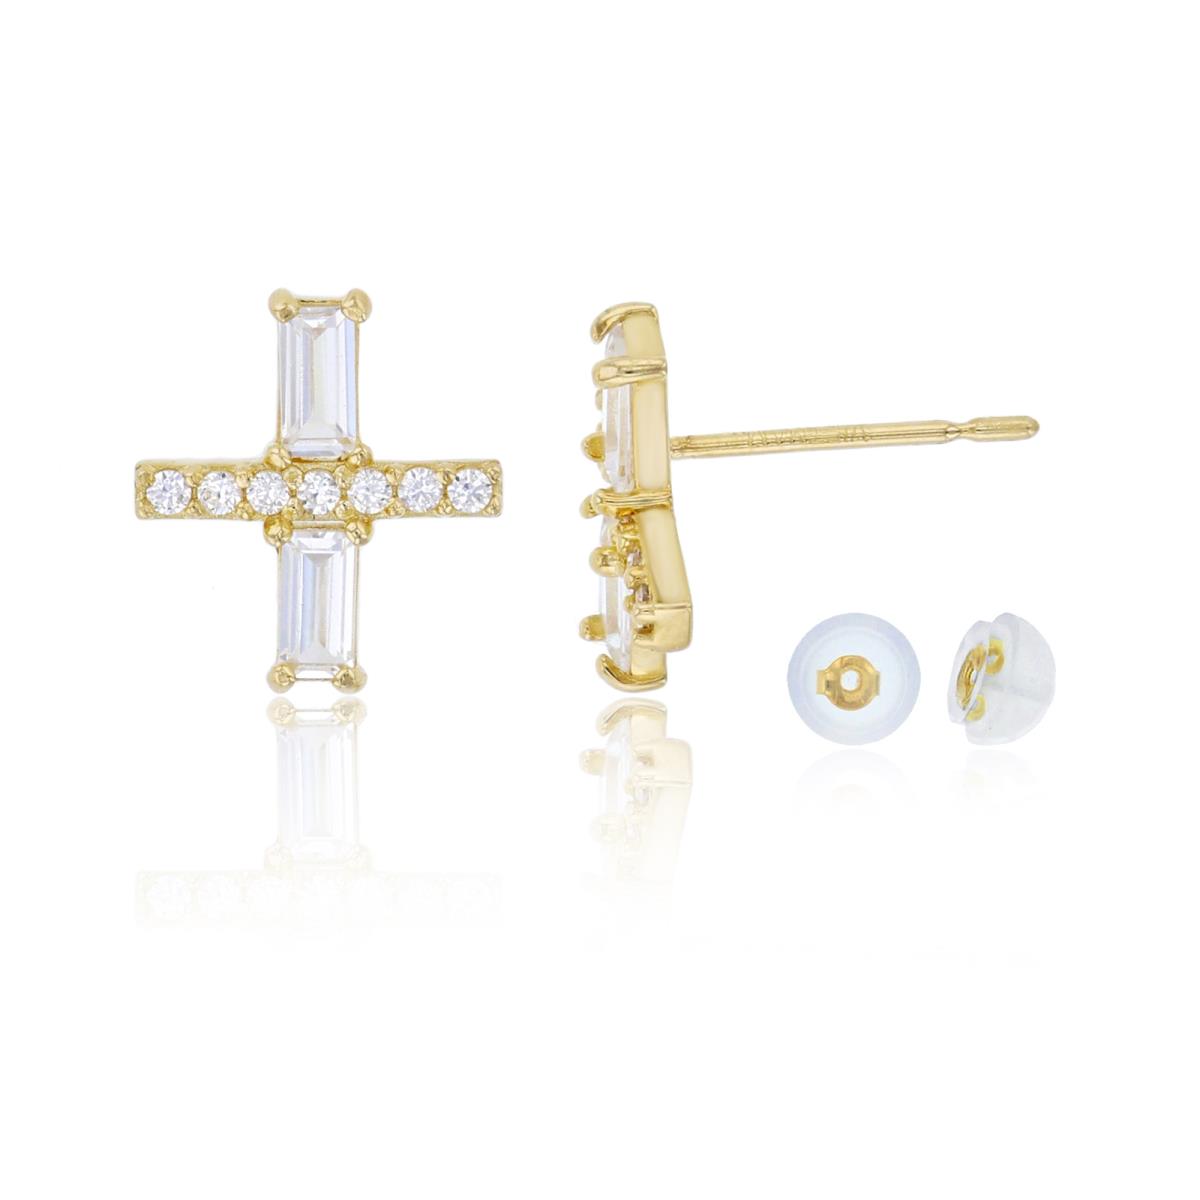 10K Yellow Gold Round Cut & Baguette CZ "X" Stud Earring with Silicone Back